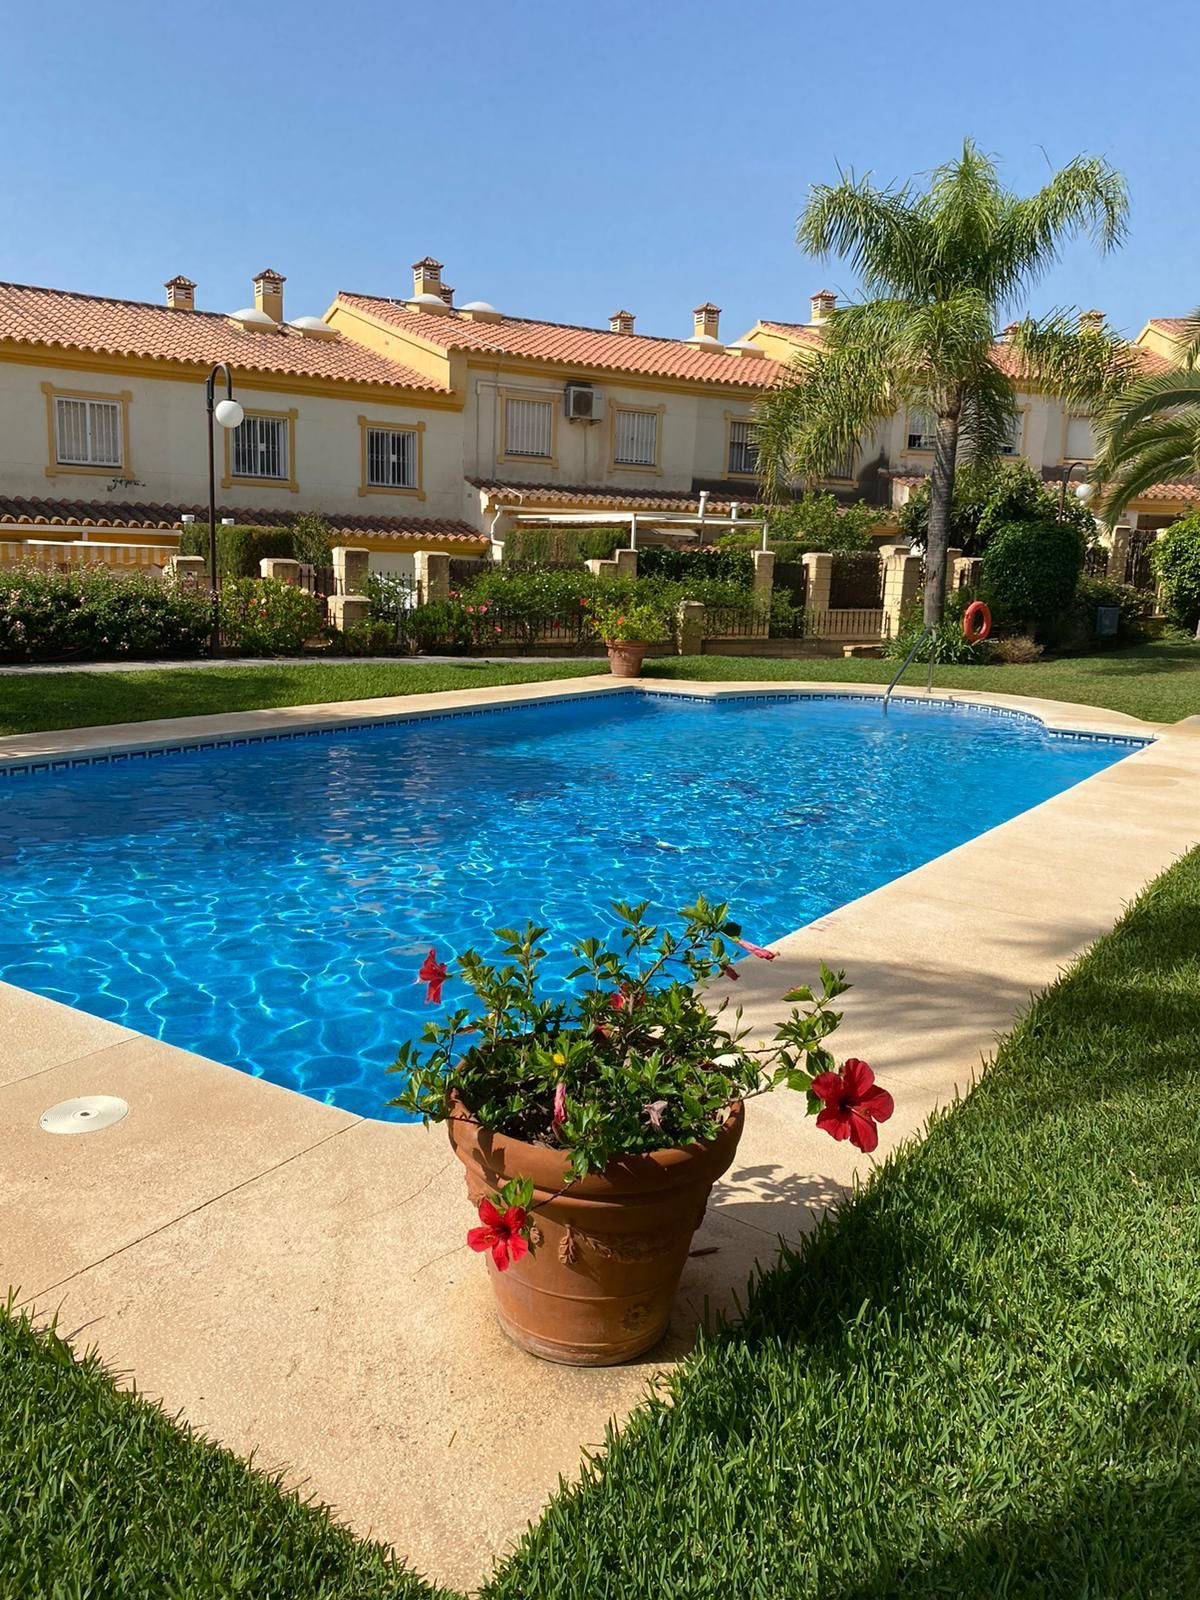 This magnificent townhouse is located in the Urb. Las Buganvillas in La Leala, with a communal pool , Spain